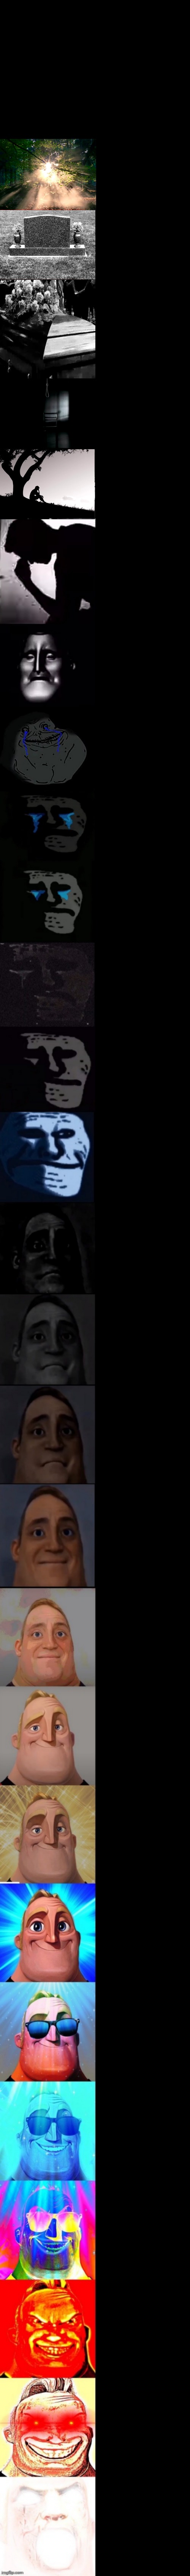 Mr. Incredible becoming sad to canny even more extended Blank Meme Template